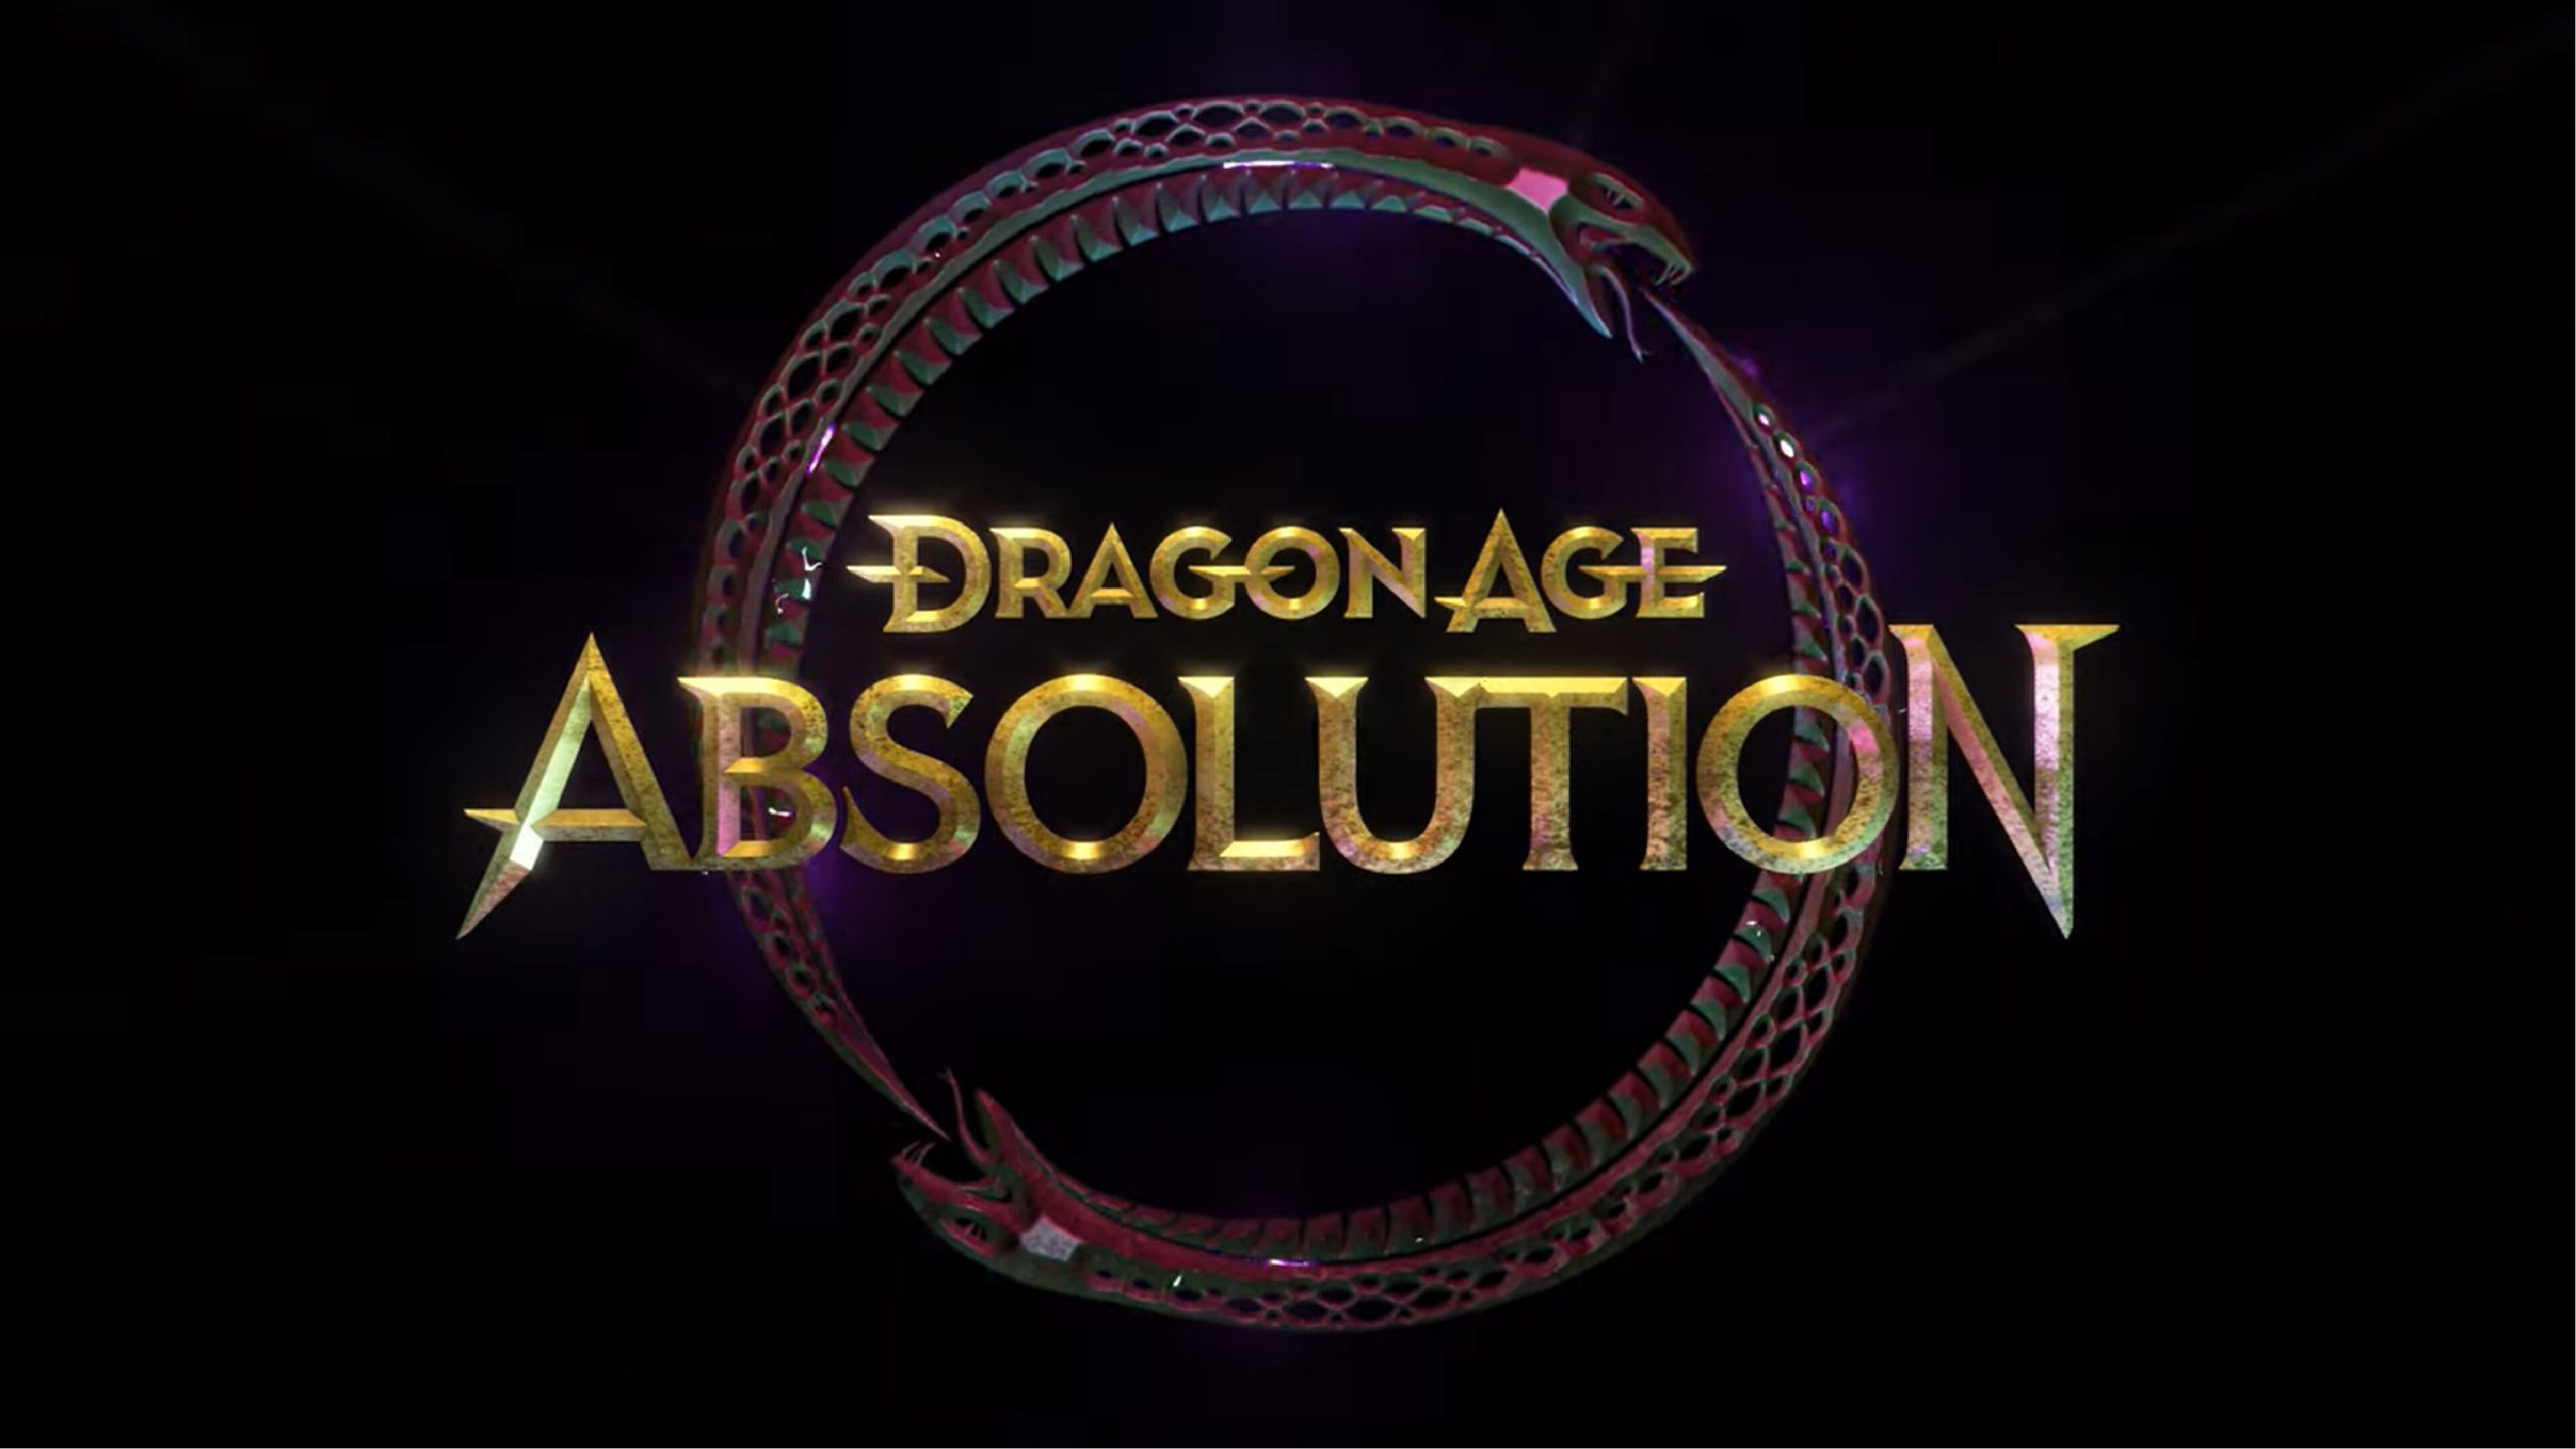 Netflix's Dragon Age: Absolution series already has a release date